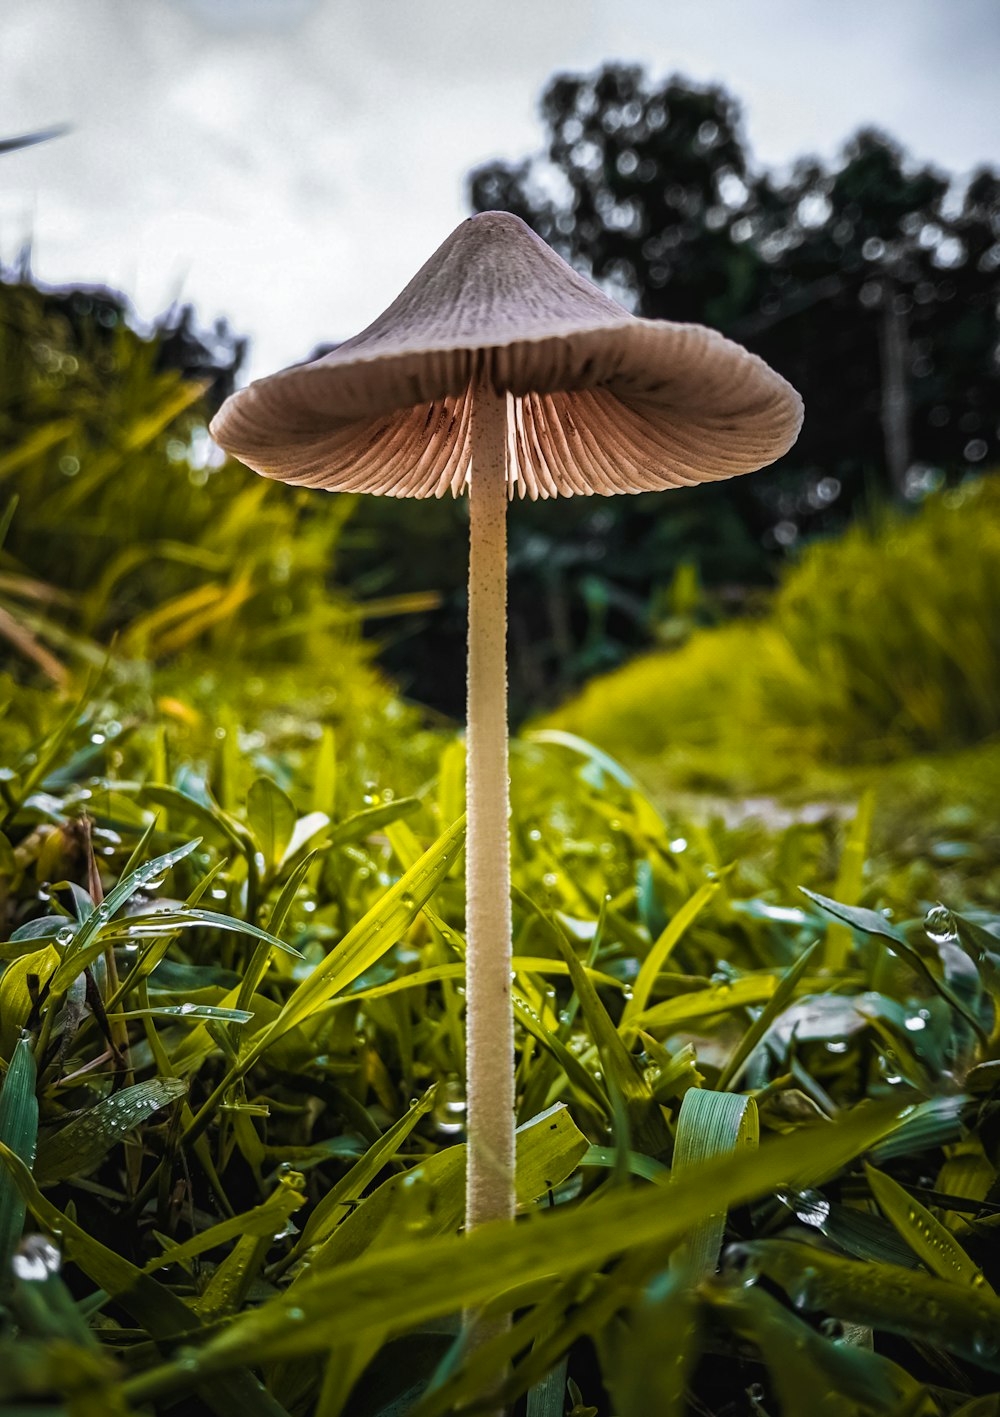 a mushroom growing in a forest